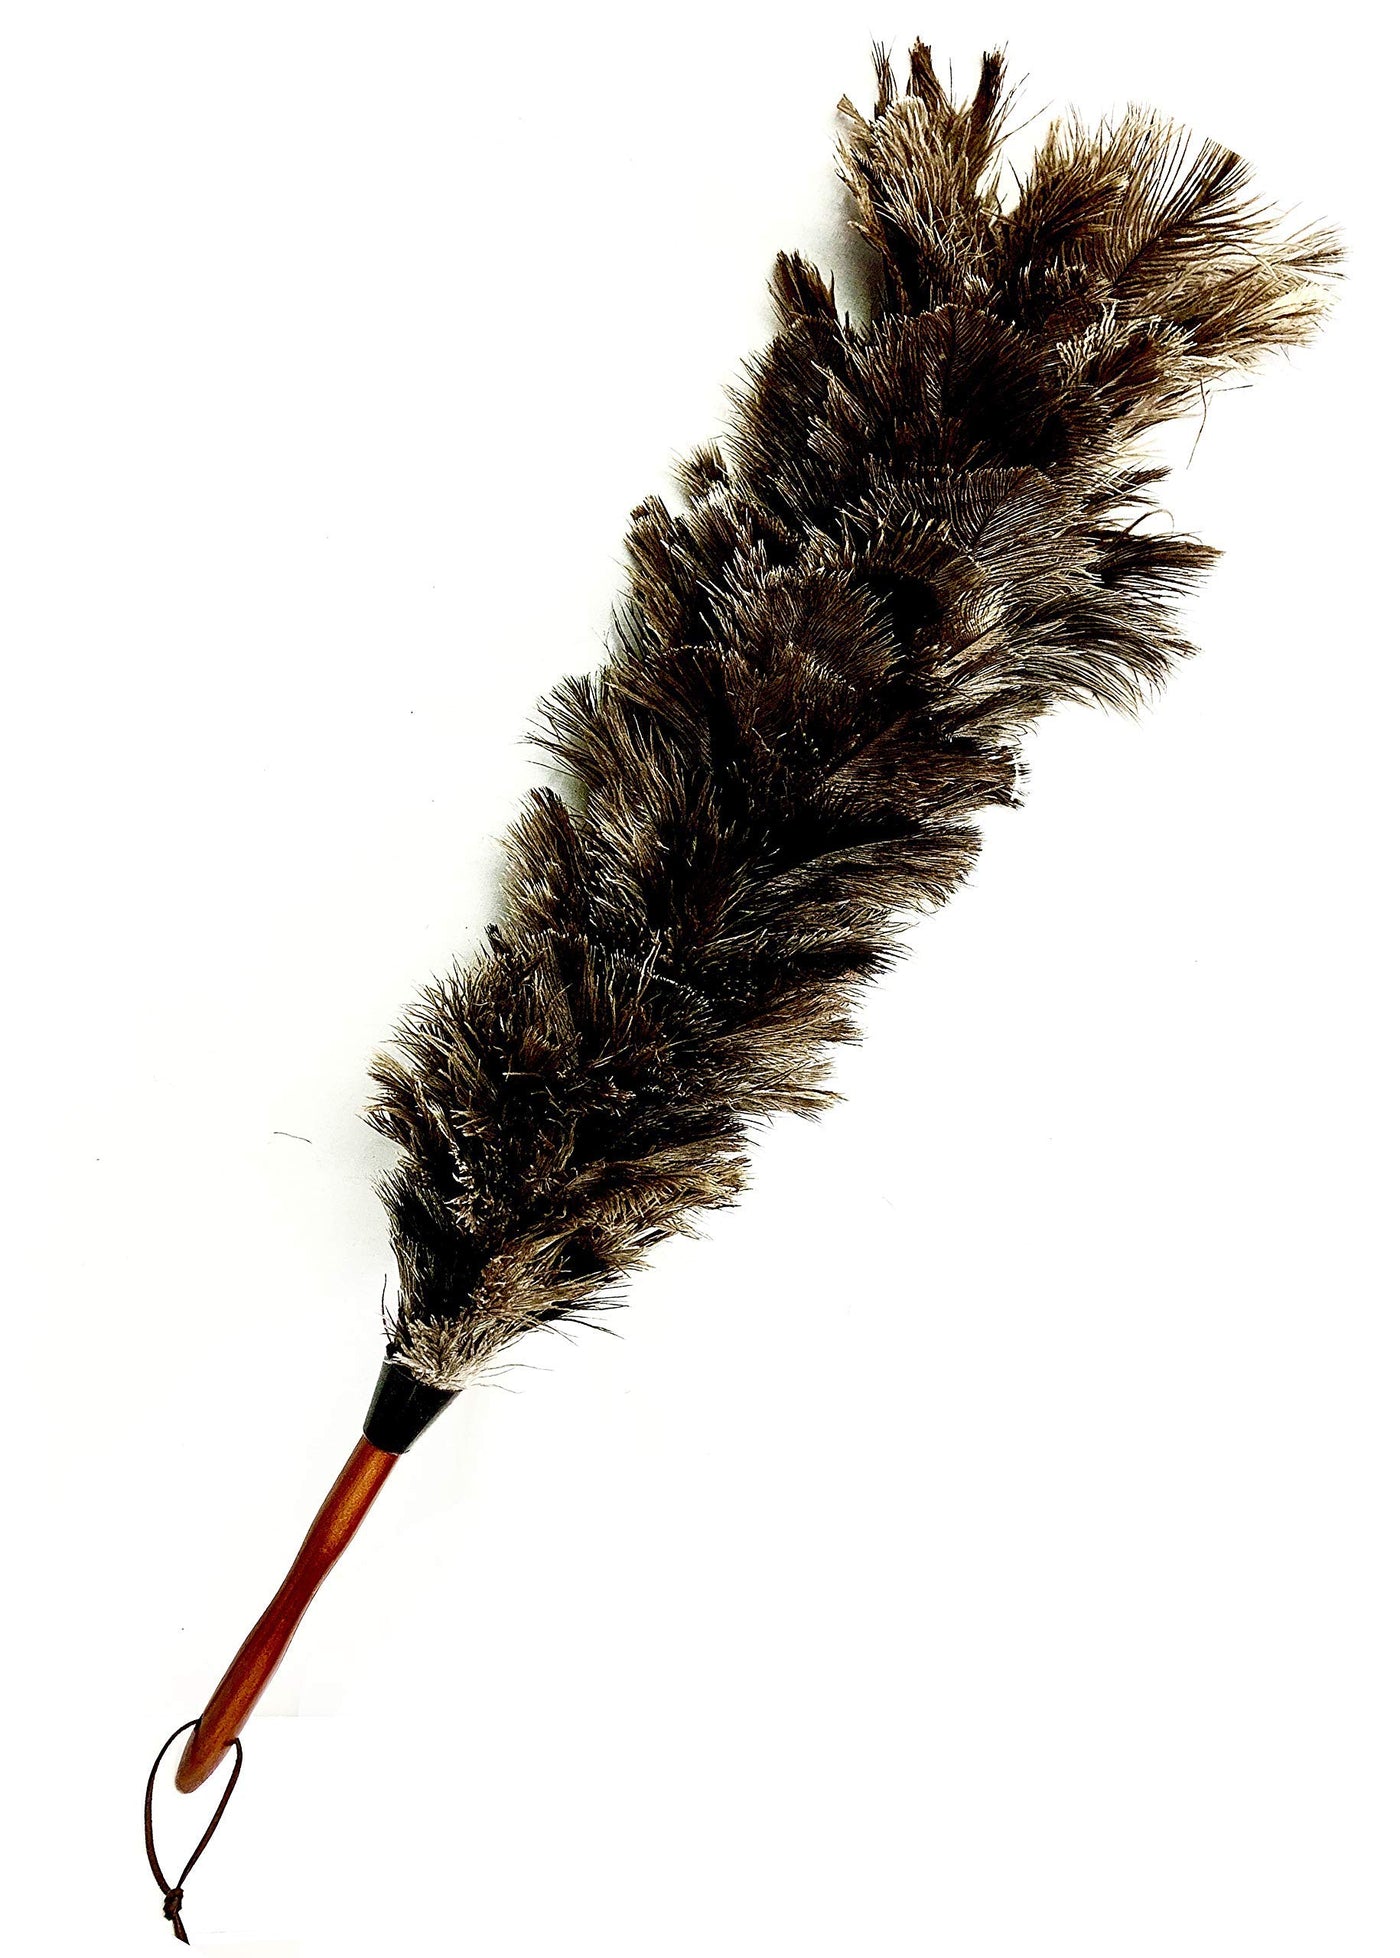 AAYU Brand Premium Ostrich Feather Duster Professional | Natural Duster for Cleaning and Feather Moping | Genuine Ostrich Feather Duster Long Wooden Handle | Eco-Friendly | Easy to Clean Dust 75 Cm